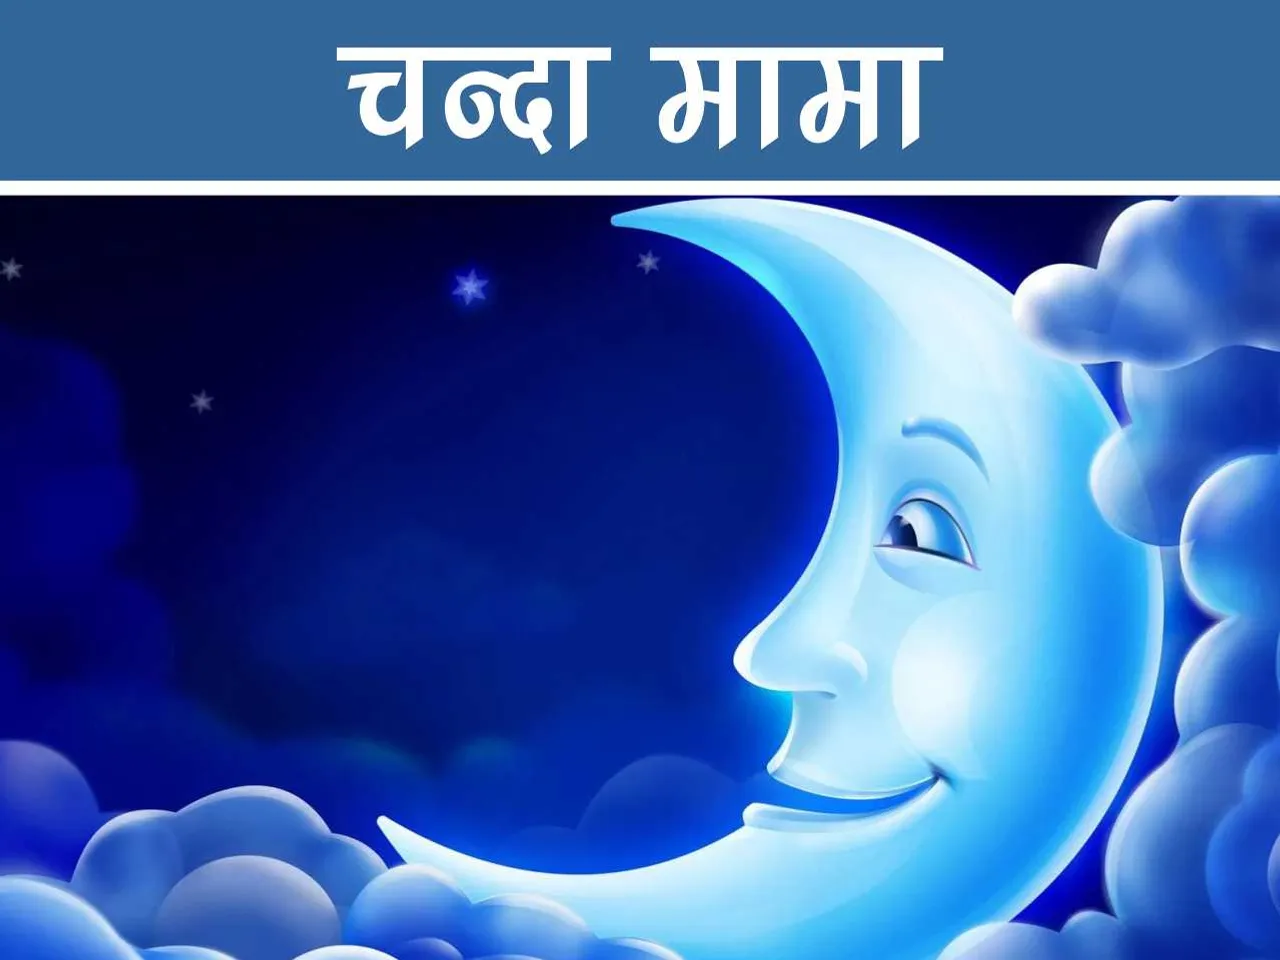 Moon and clouds cartoon image